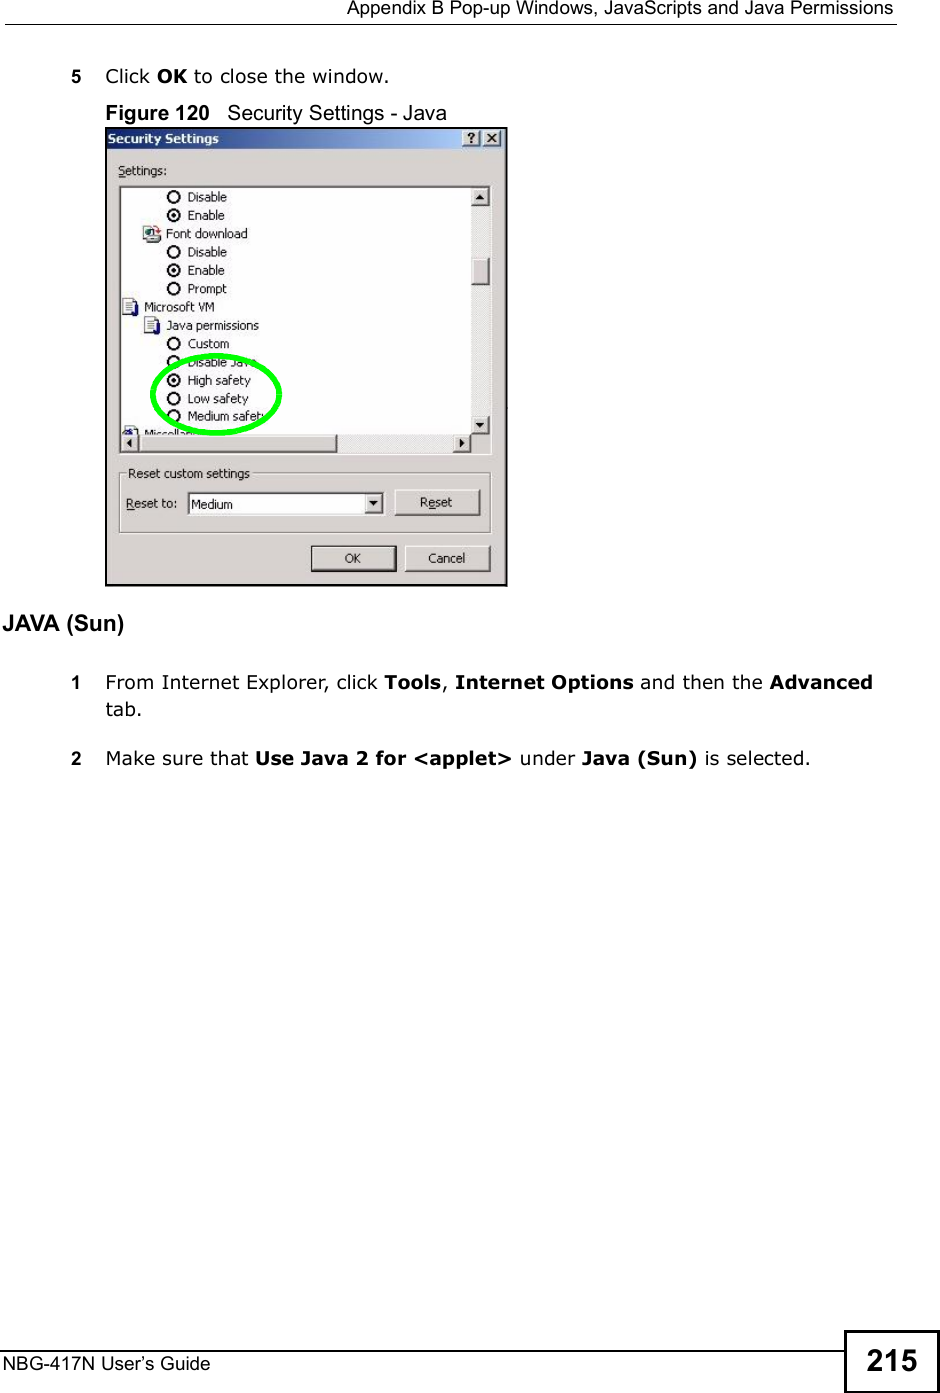  Appendix BPop-up Windows, JavaScripts and Java PermissionsNBG-417N User s Guide 2155Click OK to close the window.Figure 120   Security Settings - Java JAVA (Sun)1From Internet Explorer, click Tools, Internet Options and then the Advanced tab. 2Make sure that Use Java 2 for &lt;applet&gt; under Java (Sun) is selected.